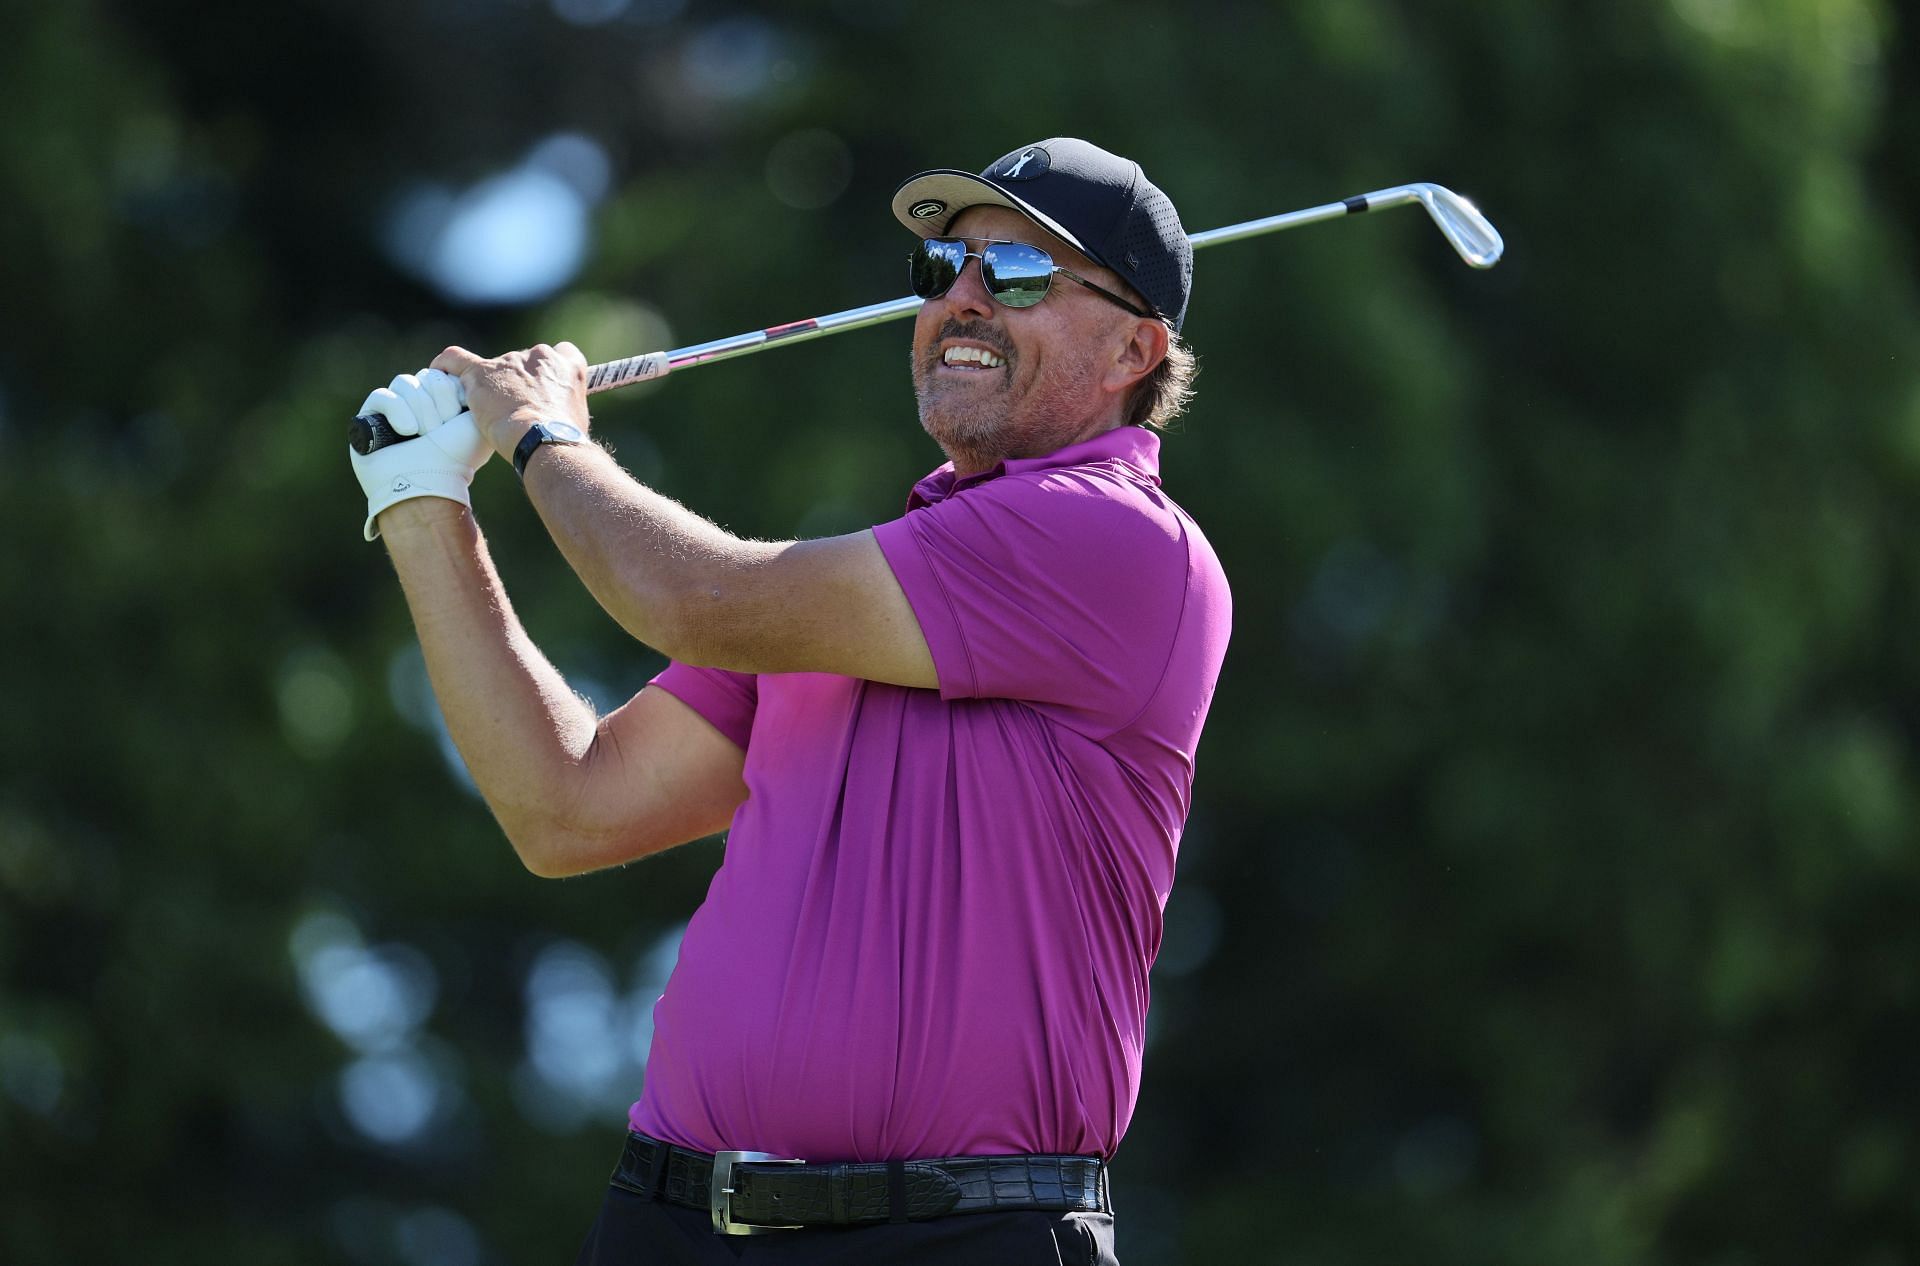 Phil Mickelson at the LIV Golf Invitational - Boston - Pro-am (Image via Andy Lyons/Getty Images)